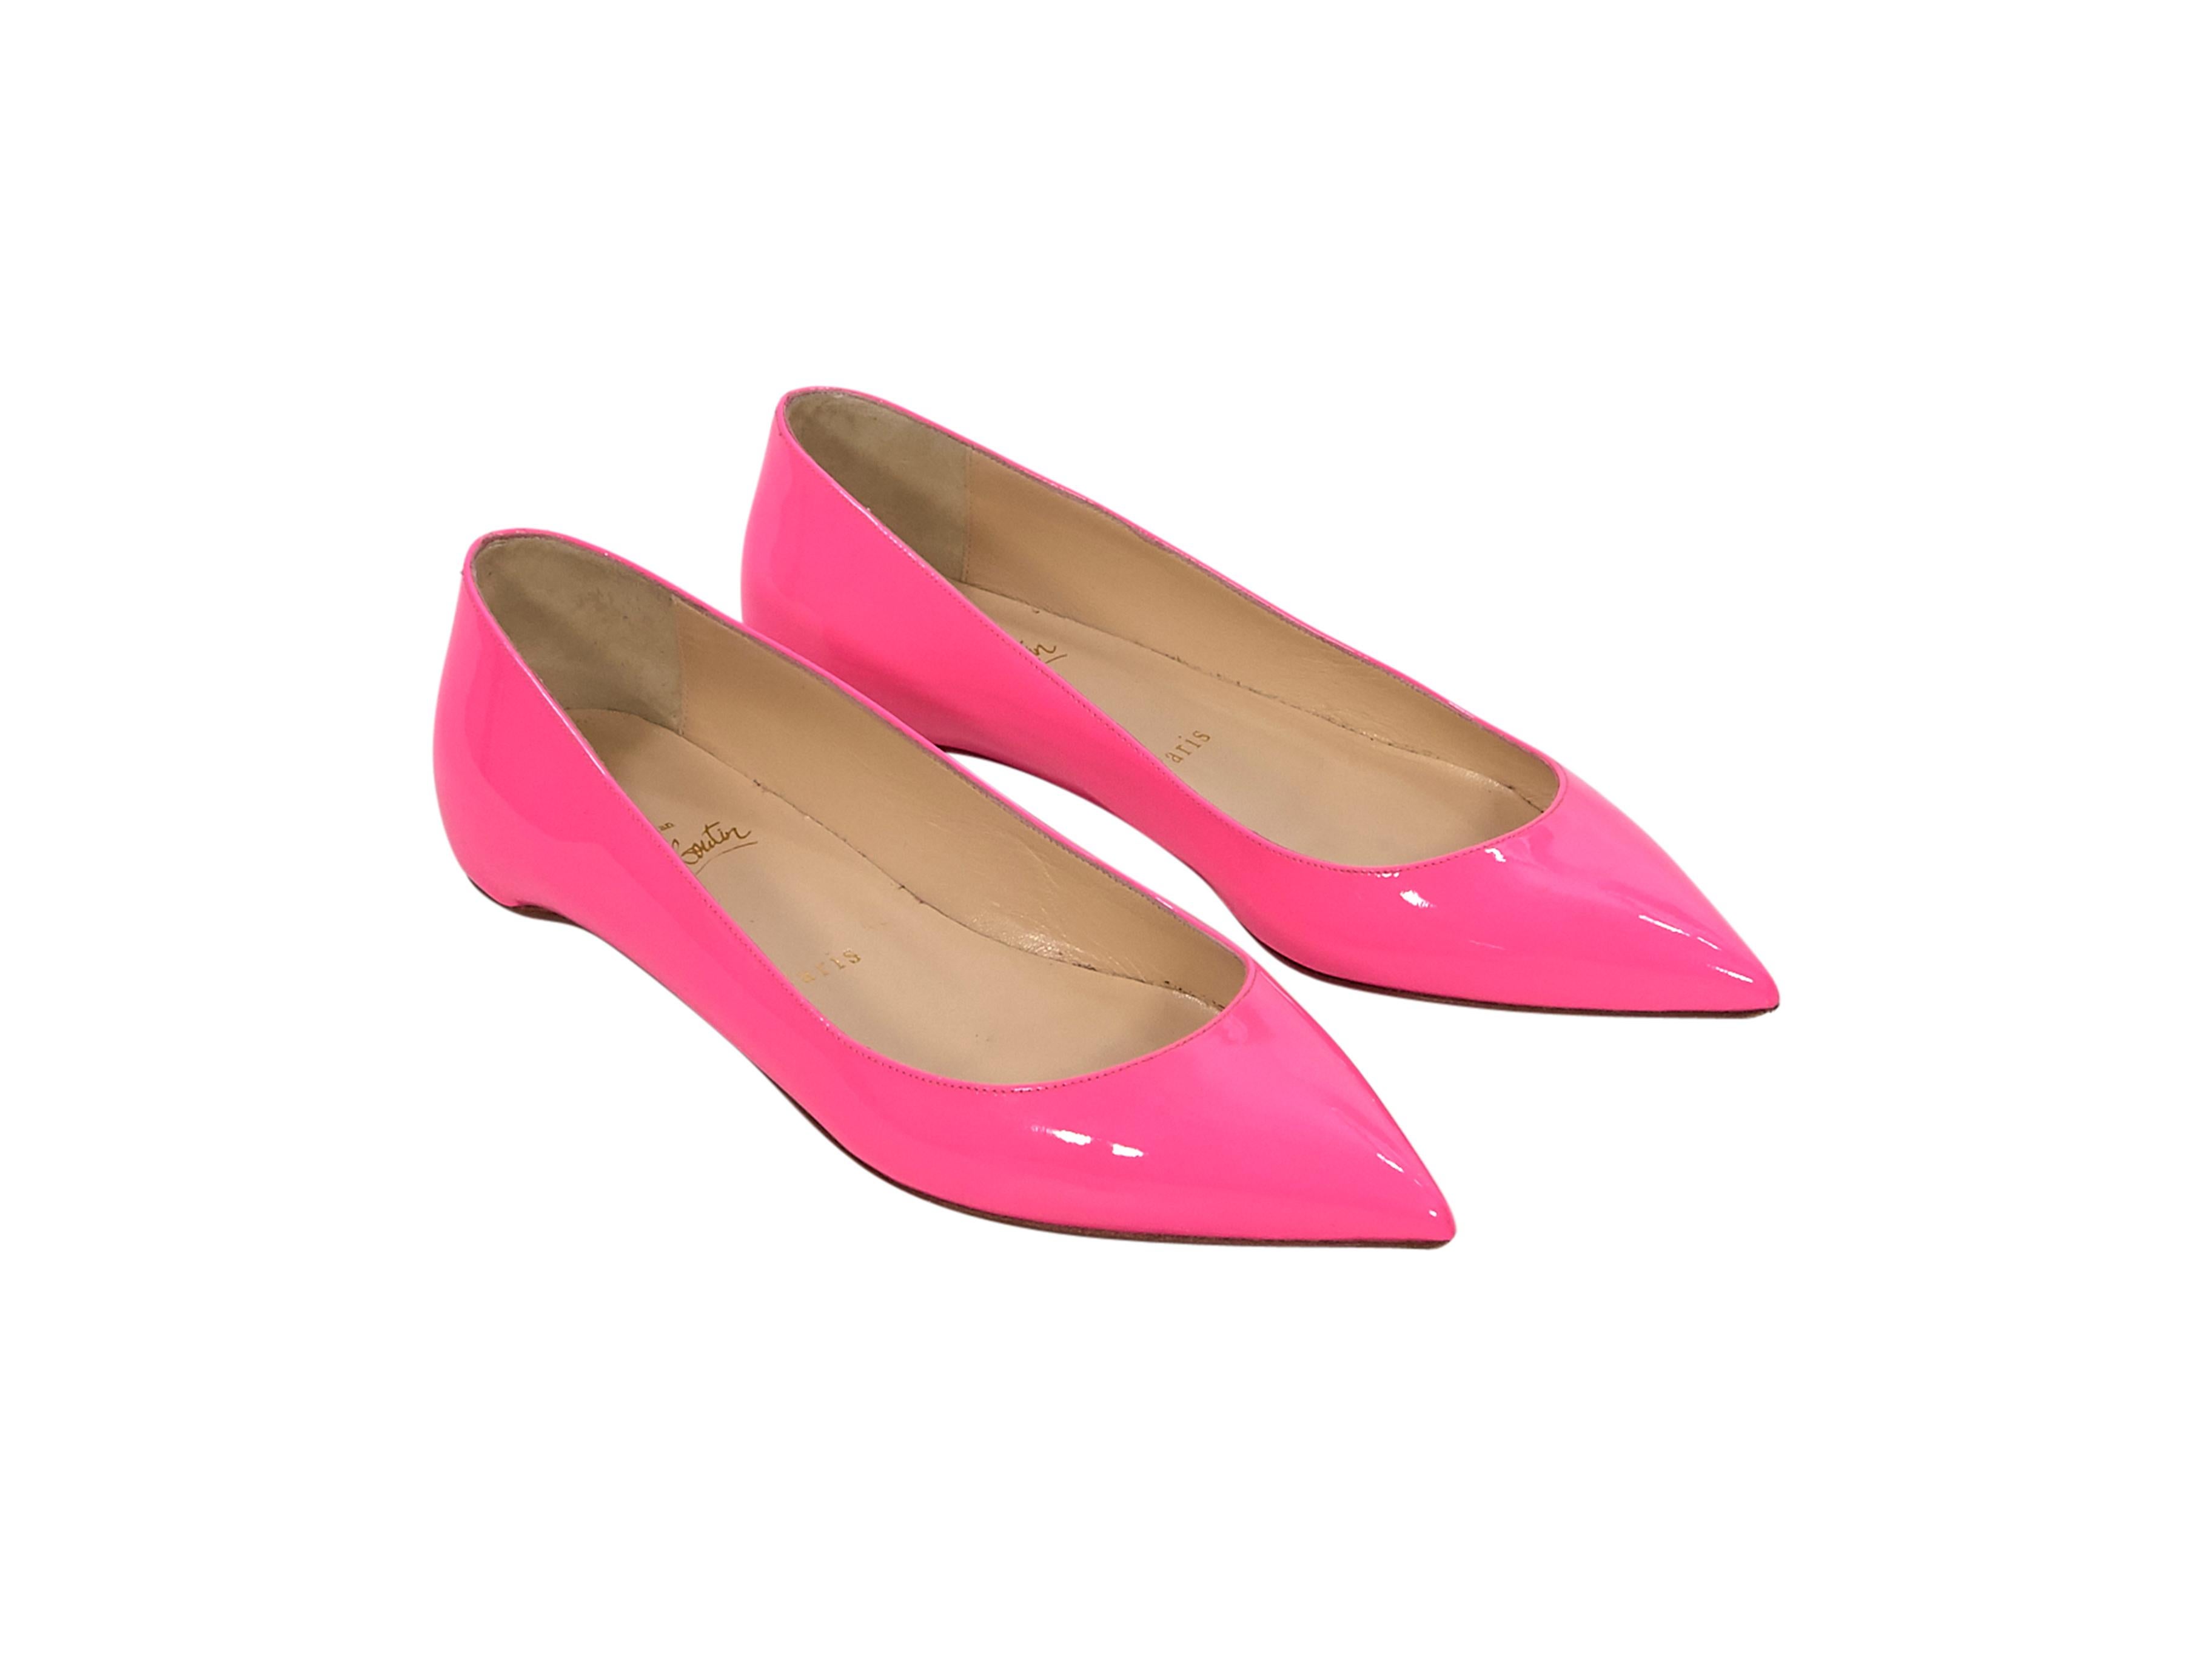 Product details:  Hot pink patent leather flats by Christian Louboutin.  Point toe.  Iconic red sole.  Slip-on style. 
Condition: Pre-owned. Very good.
Est. Retail $ 595.00